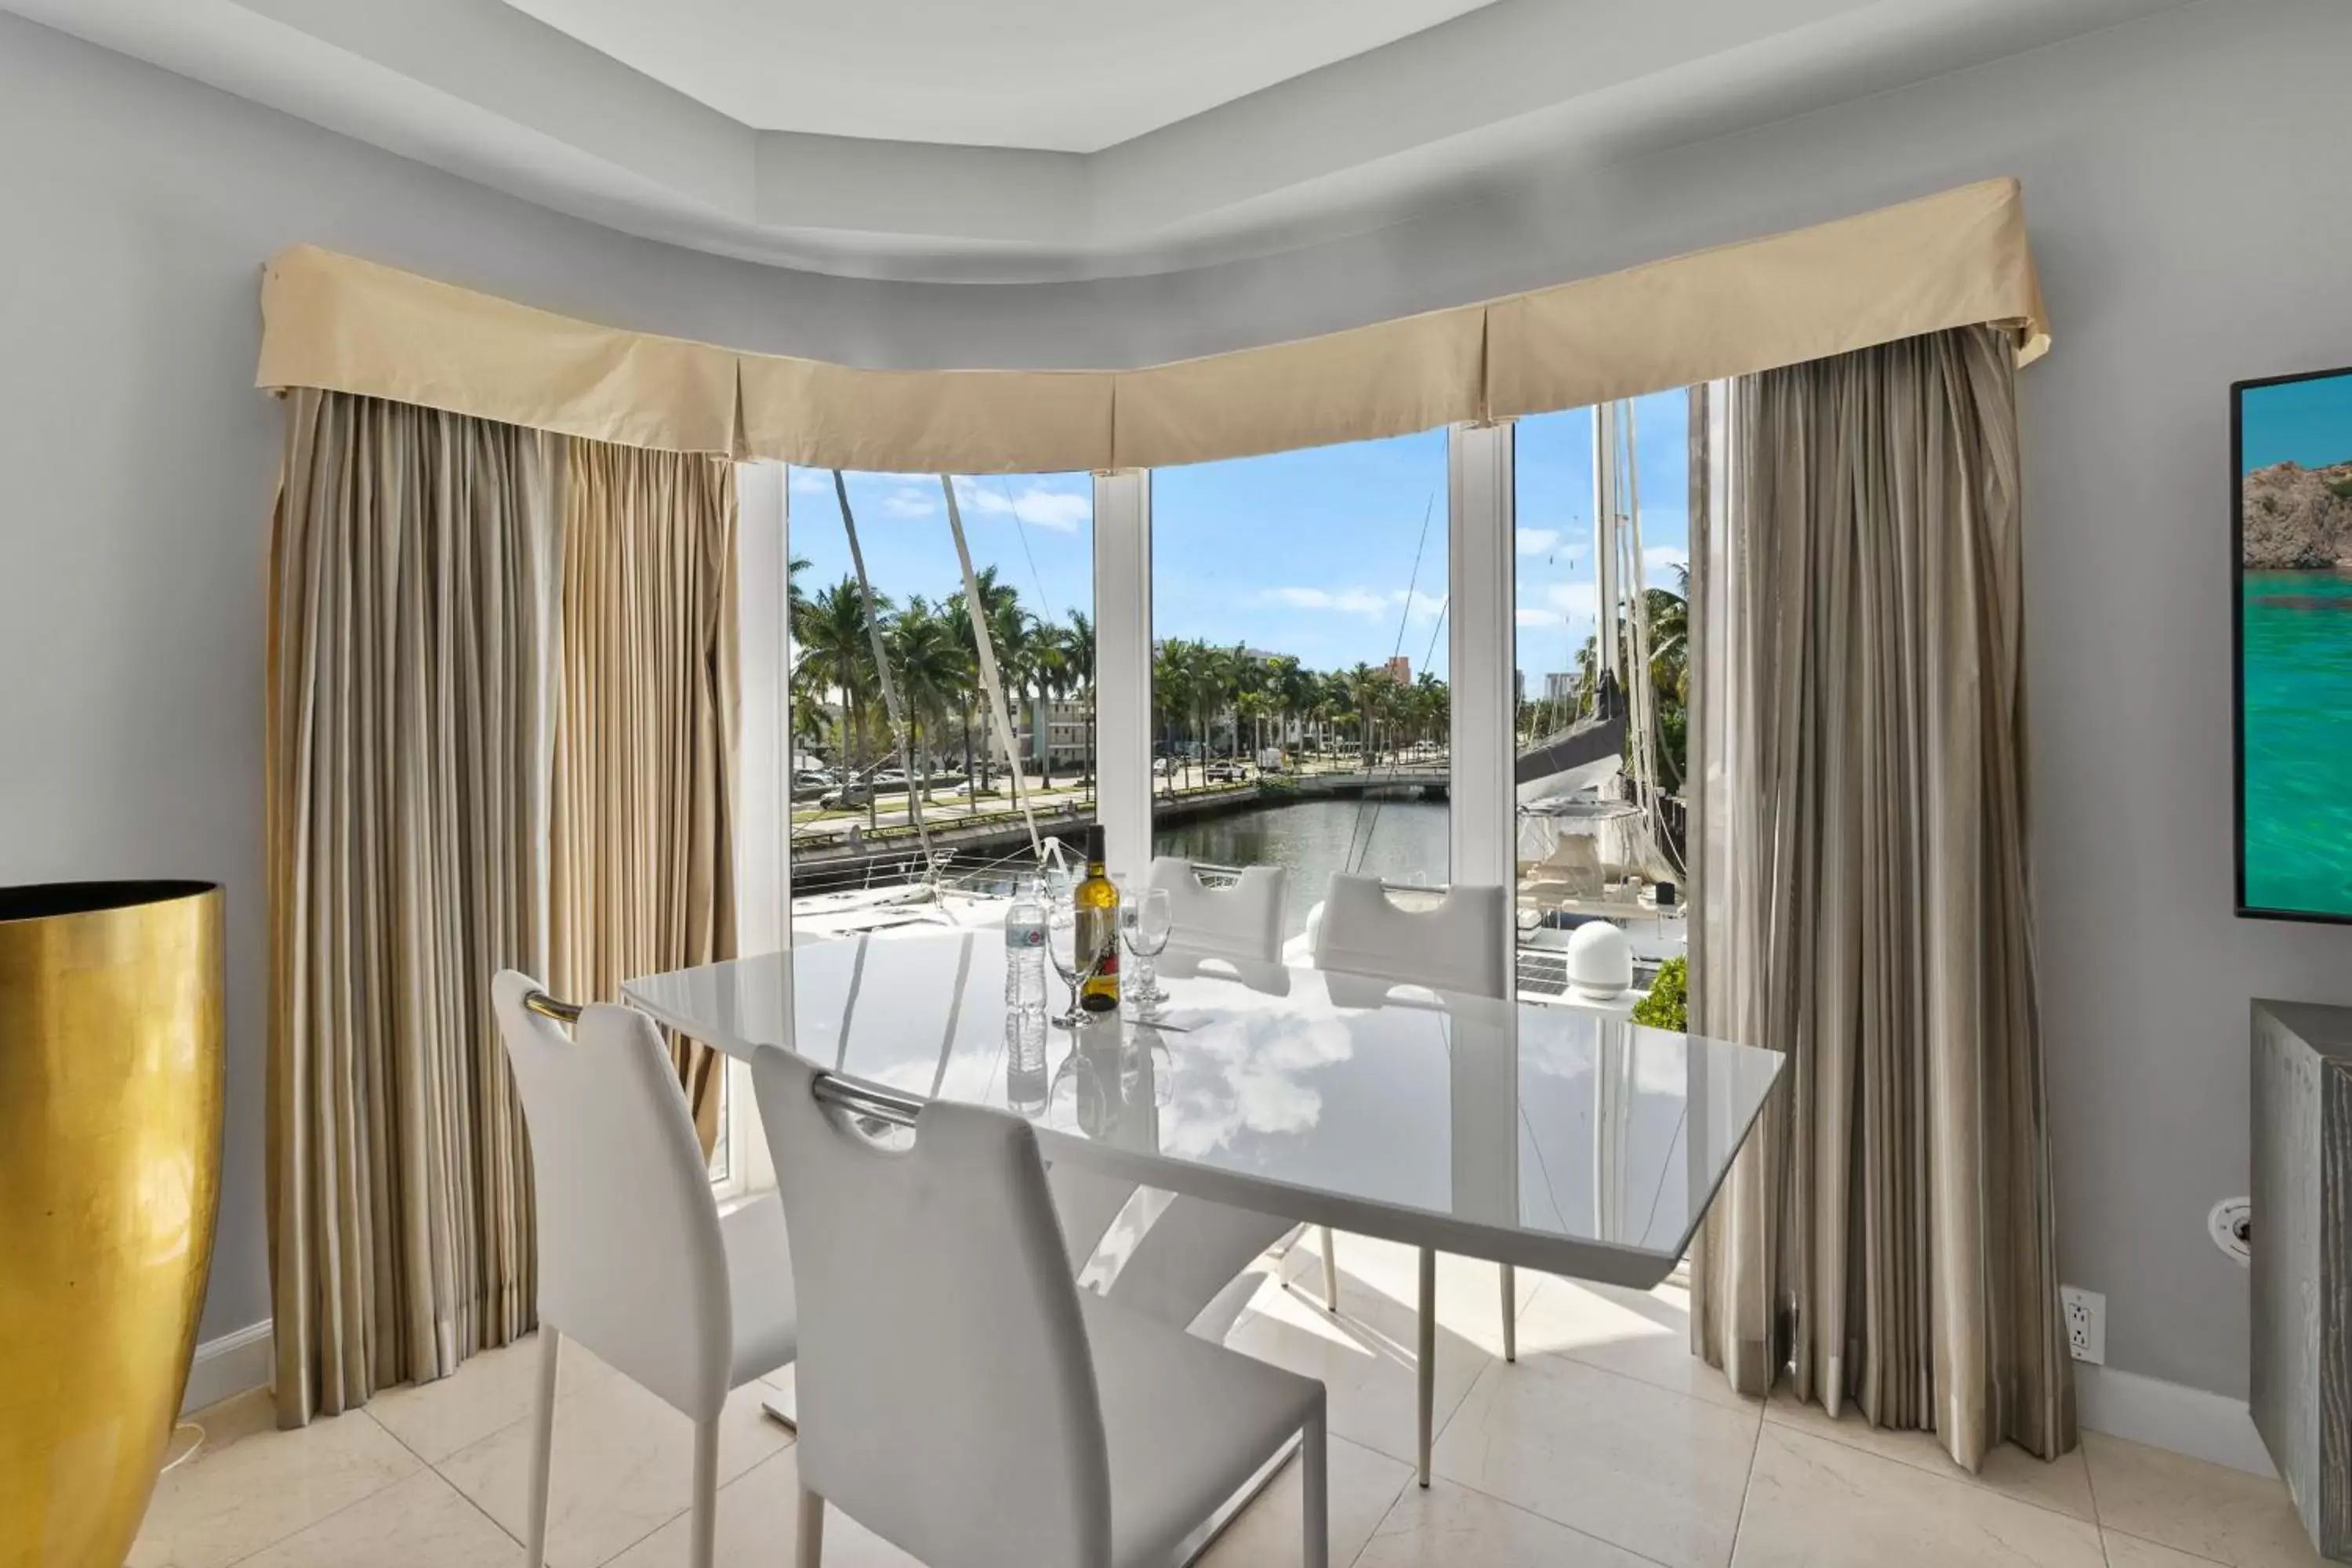 Dining area in Isle of Venice Residence and Marina